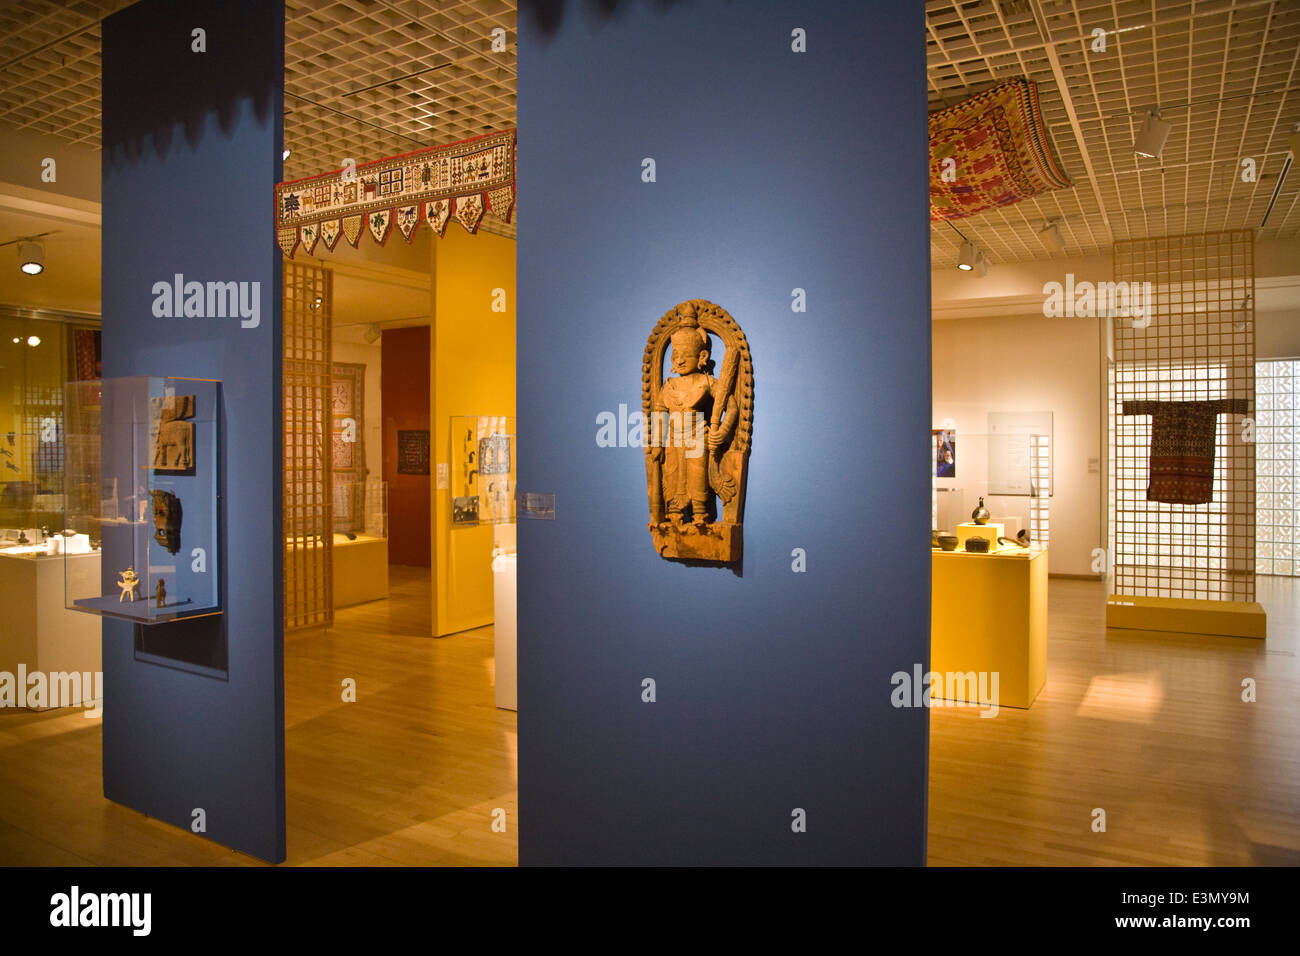 ASIAN ART on display in the MINGEI INTERNATIONAL MUSEUM located in BALBOA PARK SAN DIEGO, CALIFORNIA Stock Photo